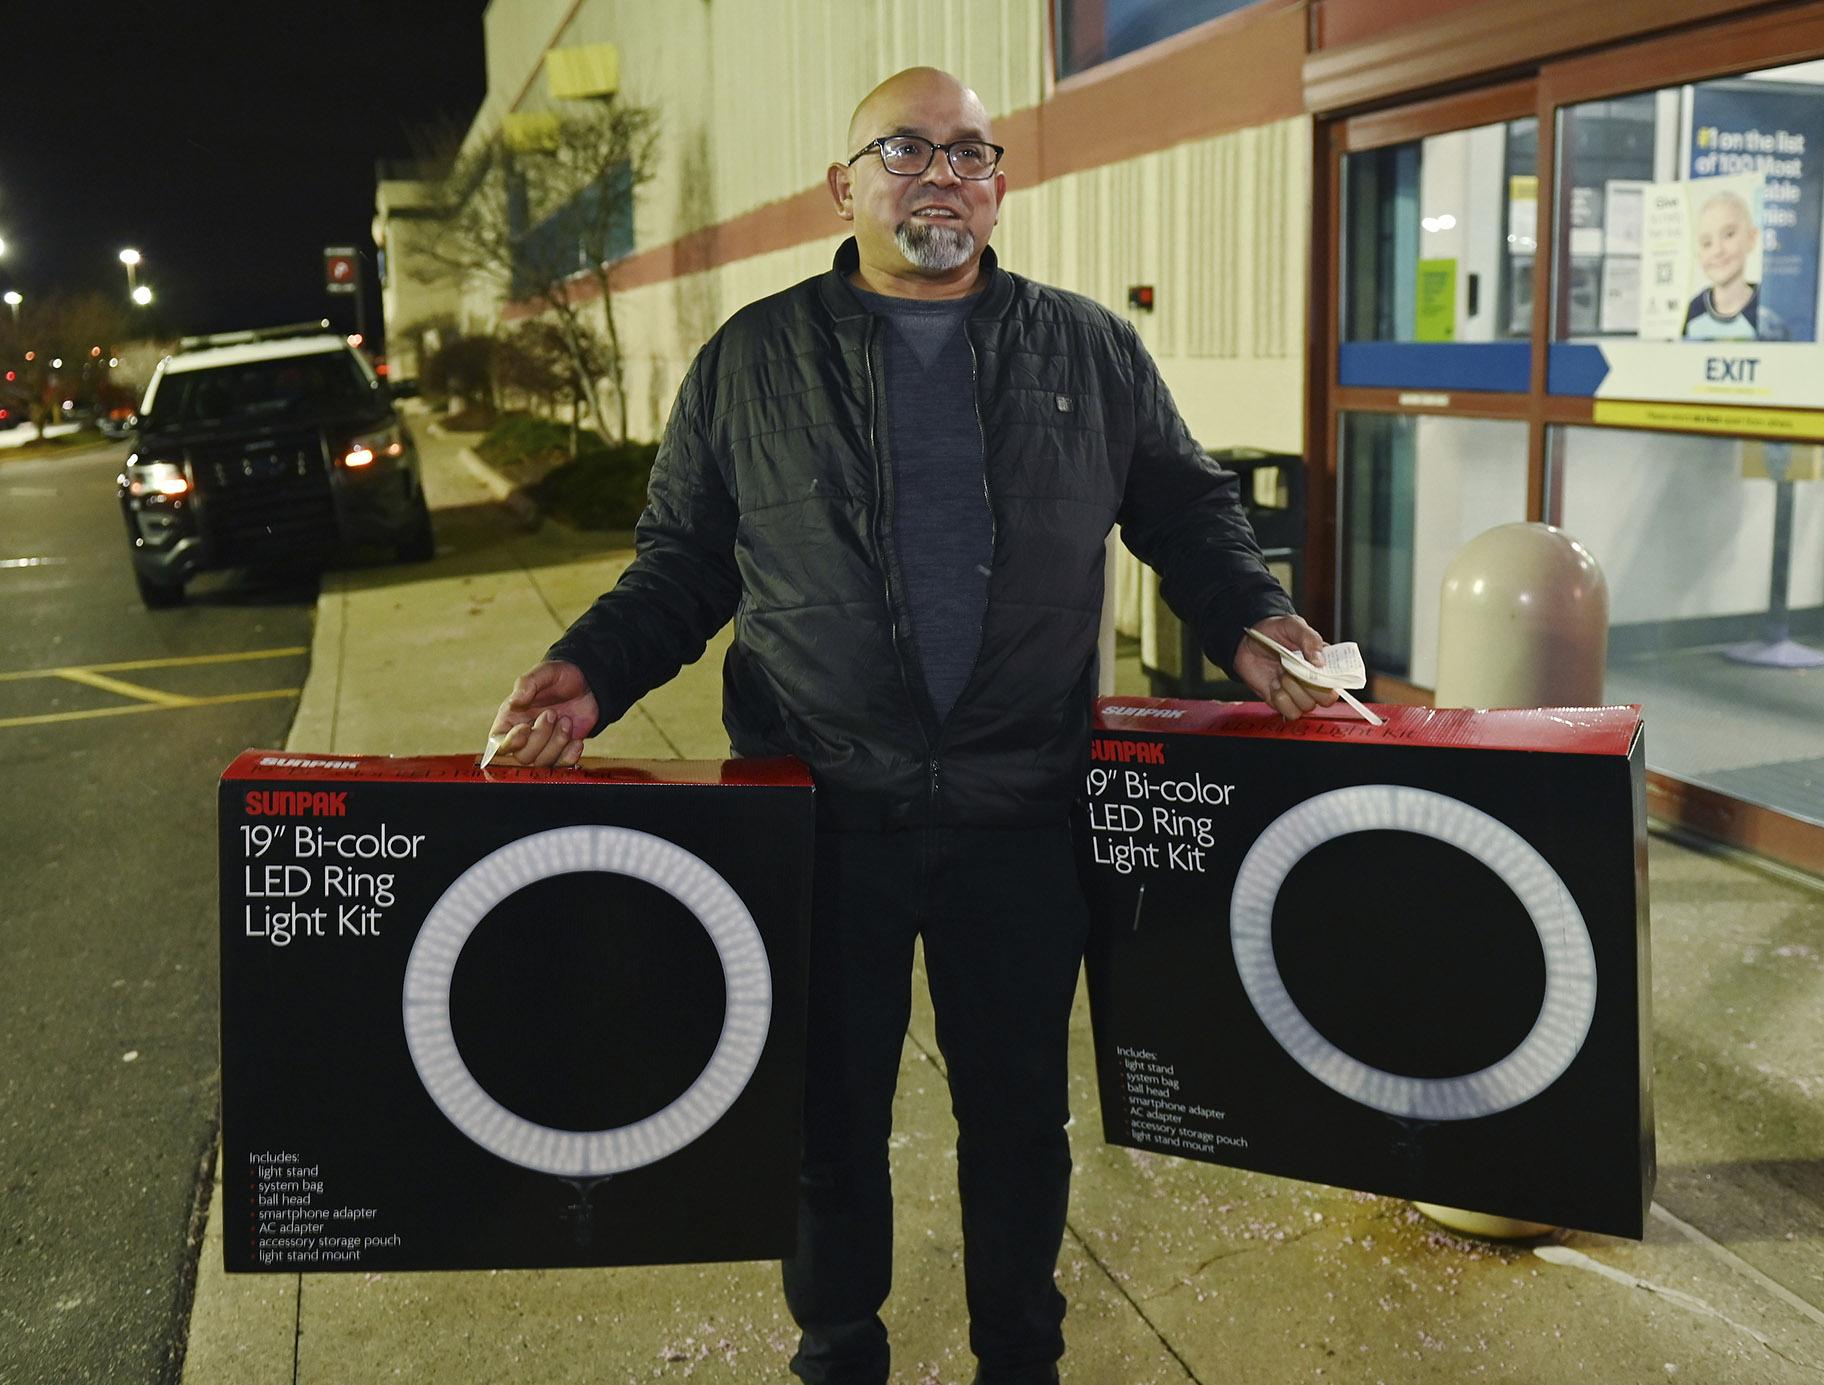 Daniel Ramon, 55, of Livonia, talks about his purchase of led lights for his daughters outside the Best Buy store in Novi, Mich., on Friday, Nov. 26, 2021. (Clarence Tabb, Jr. / Detroit News via AP)